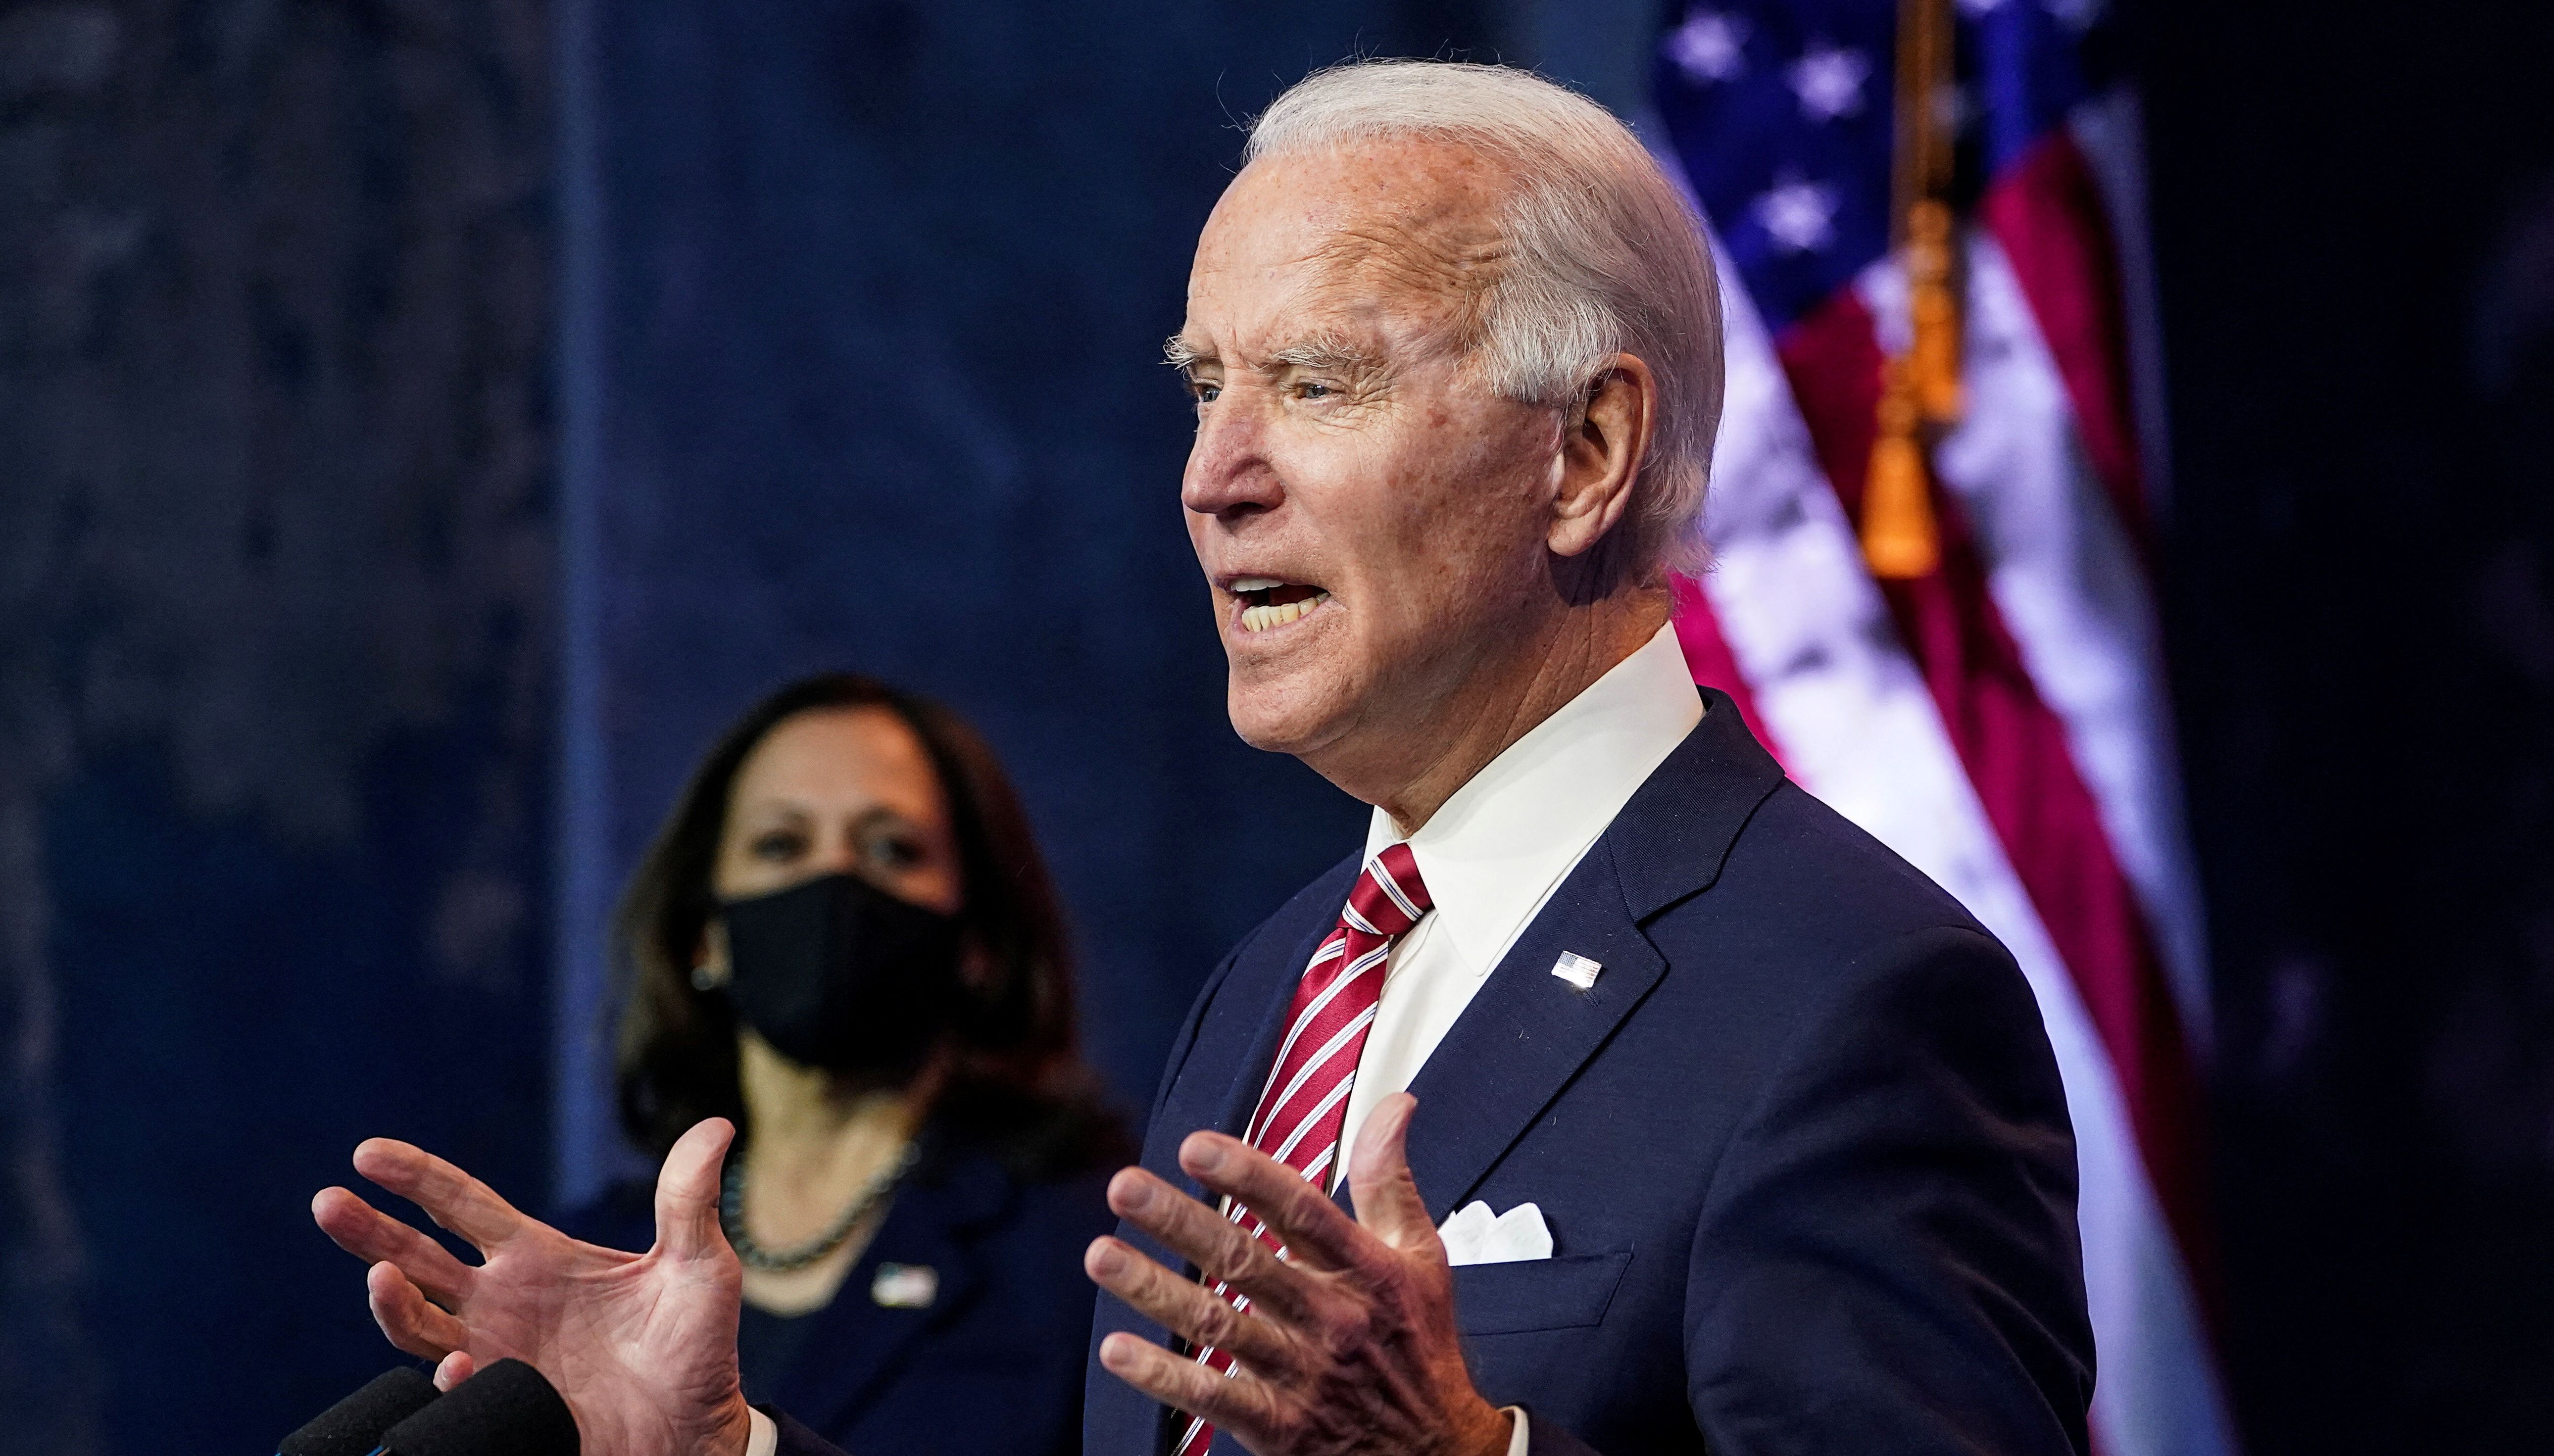 Joe Biden announced his intentions to run for the 2024 presidential election